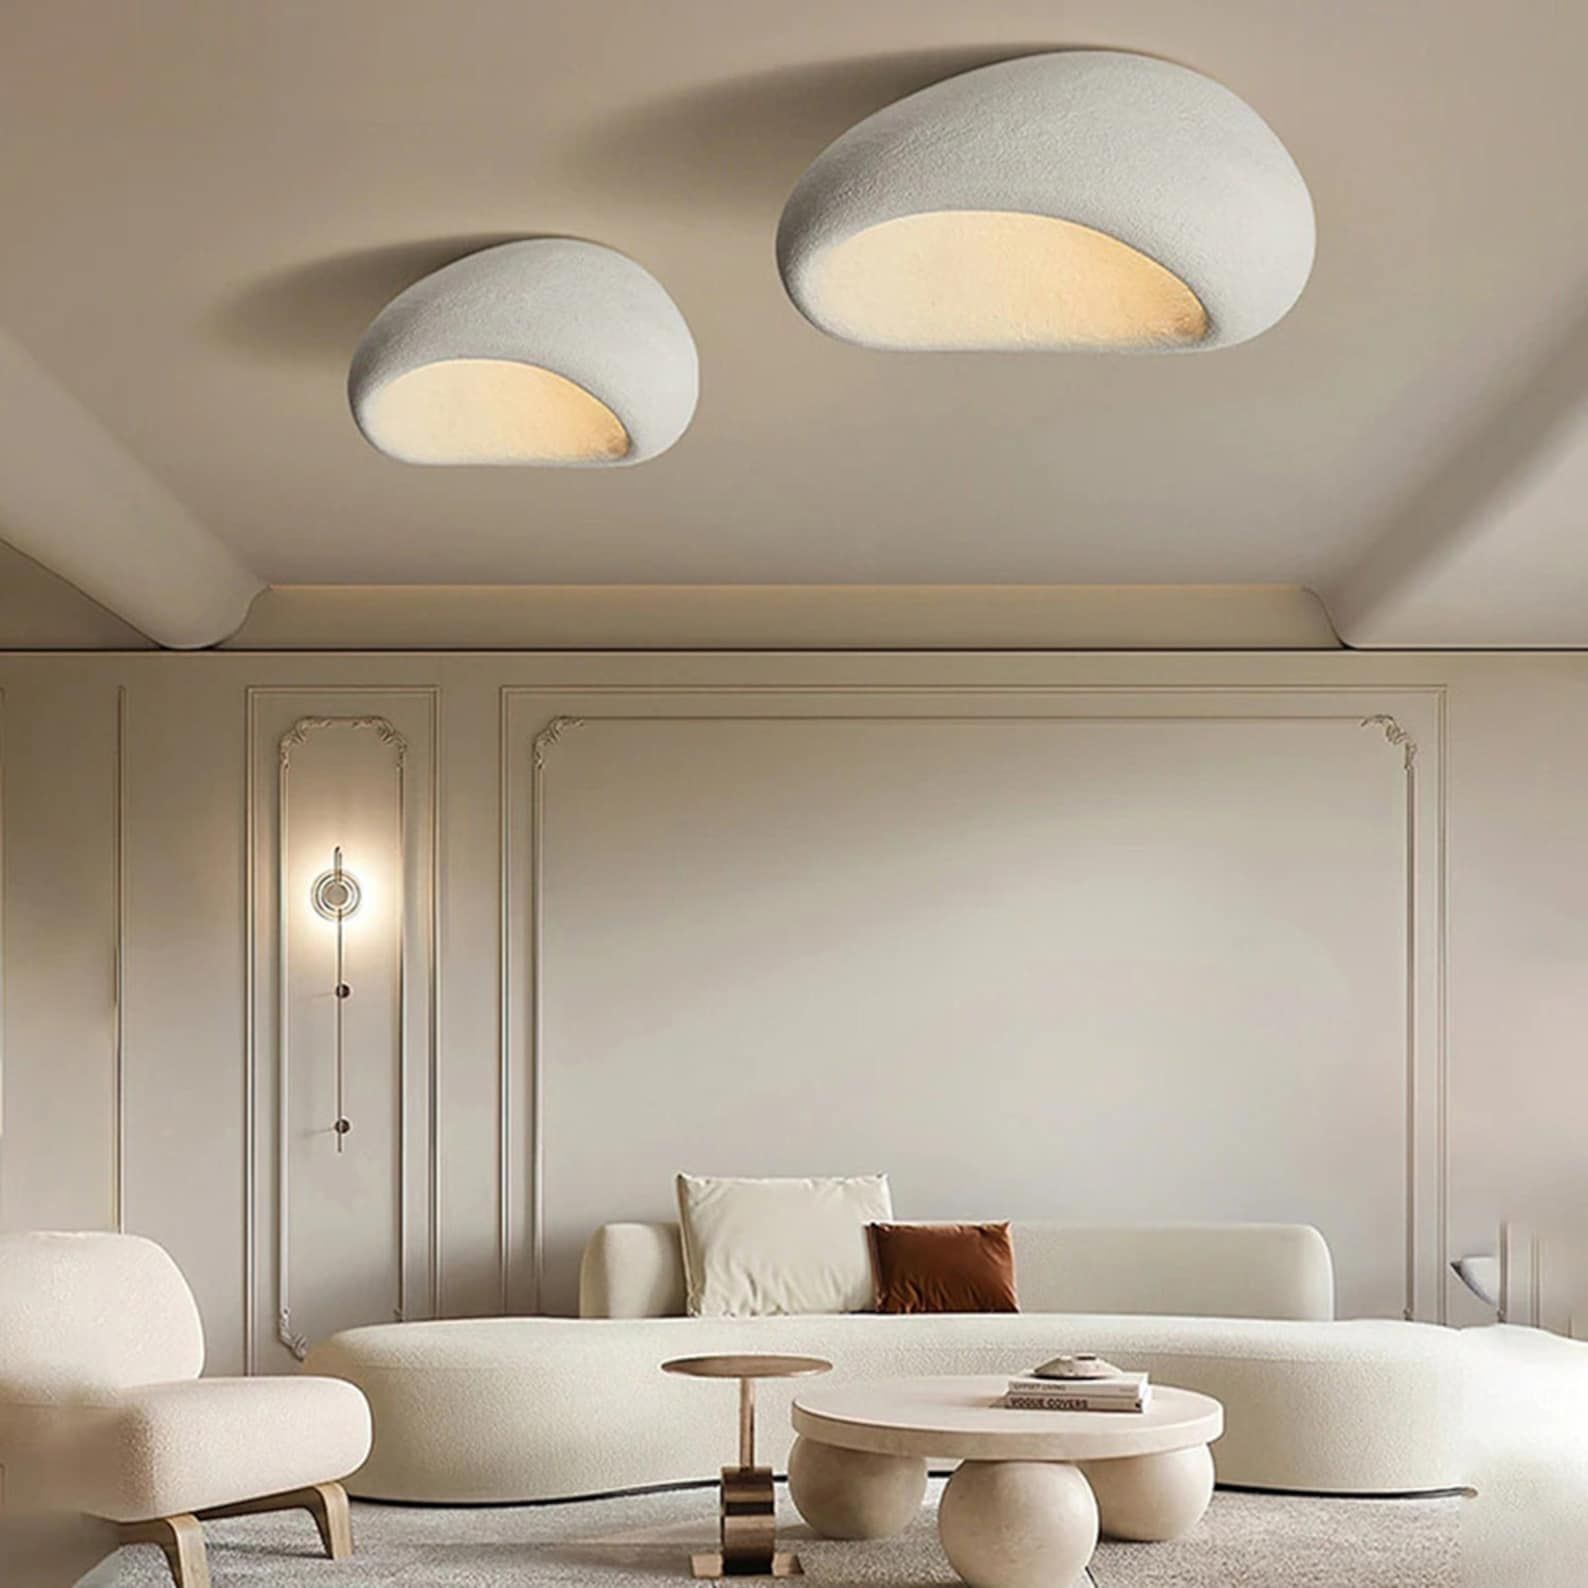 Design Ceiling Lighting Innovative Ways to Illuminate Your Ceilings